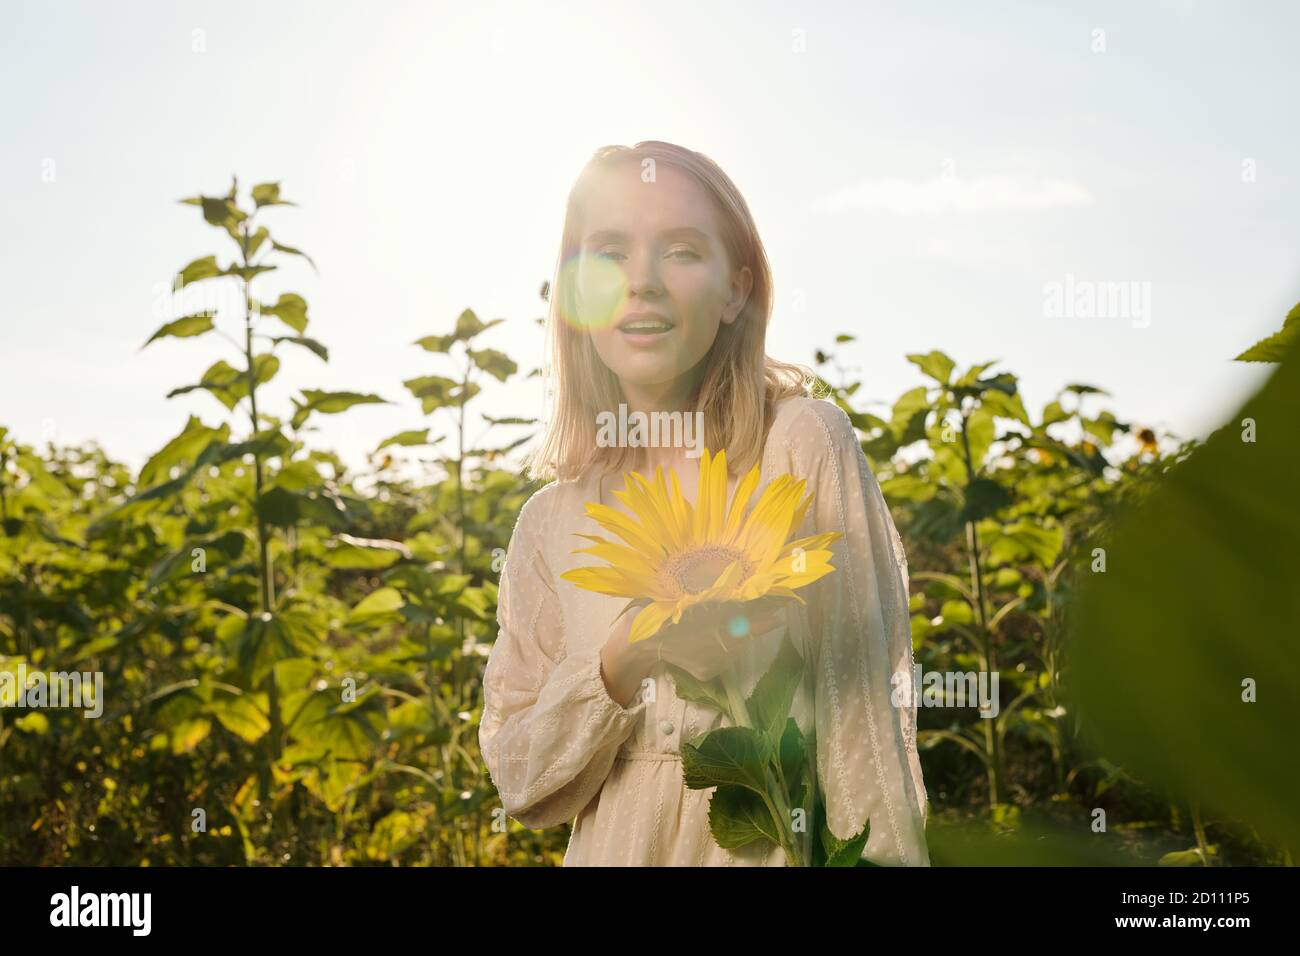 Cheerful young blond woman in white dress standing by one of large sunflowers Stock Photo